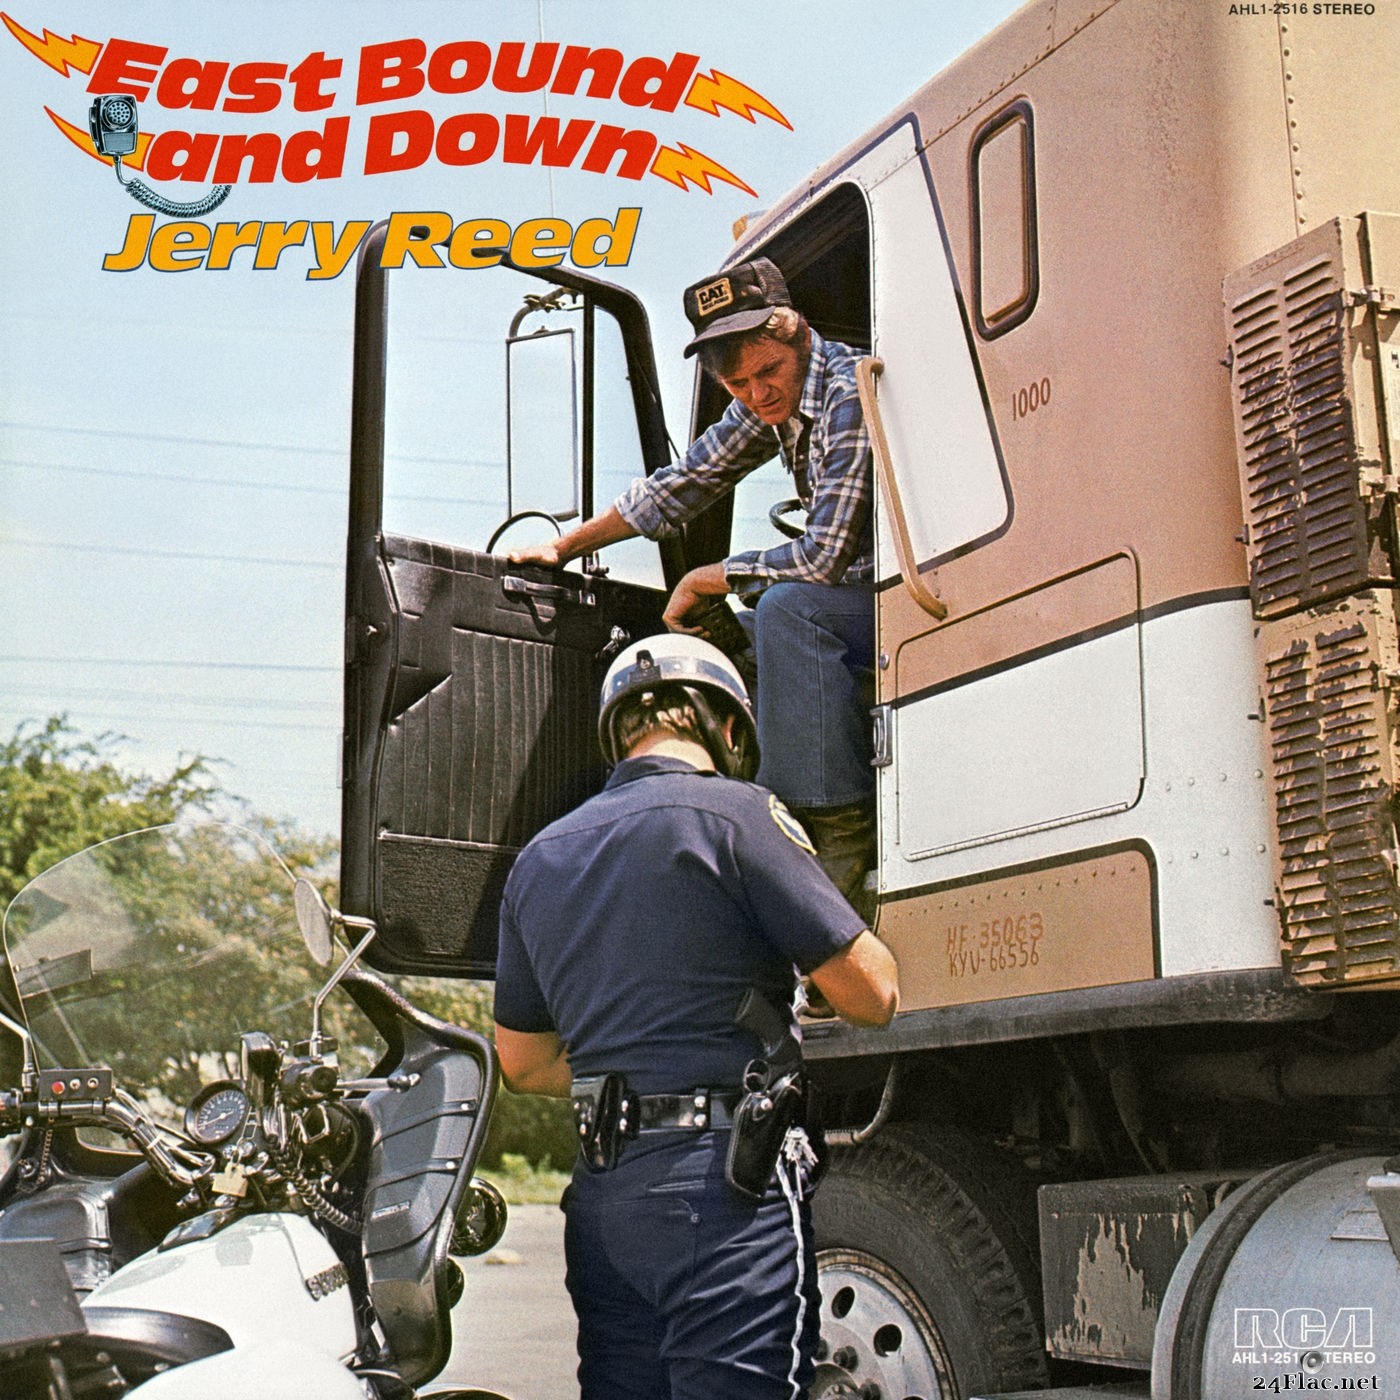 Jerry Reed - East Bound and Down (2019) Hi-Res